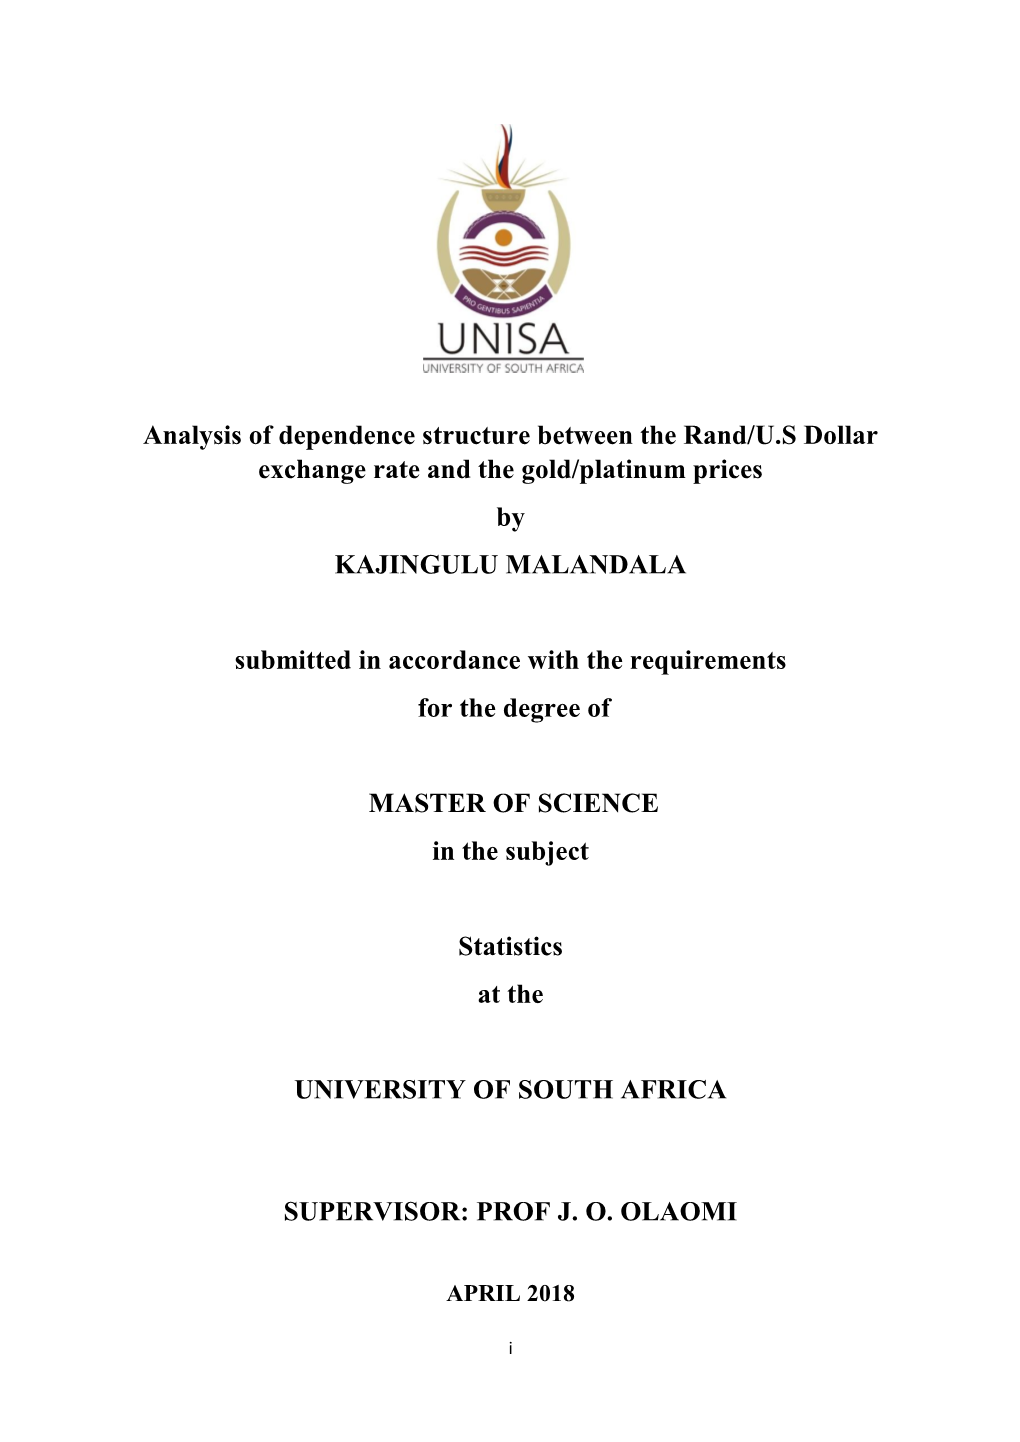 Analysis of Dependence Structure Between the Rand/U.S Dollar Exchange Rate and the Gold/Platinum Prices by KAJINGULU MALANDALA